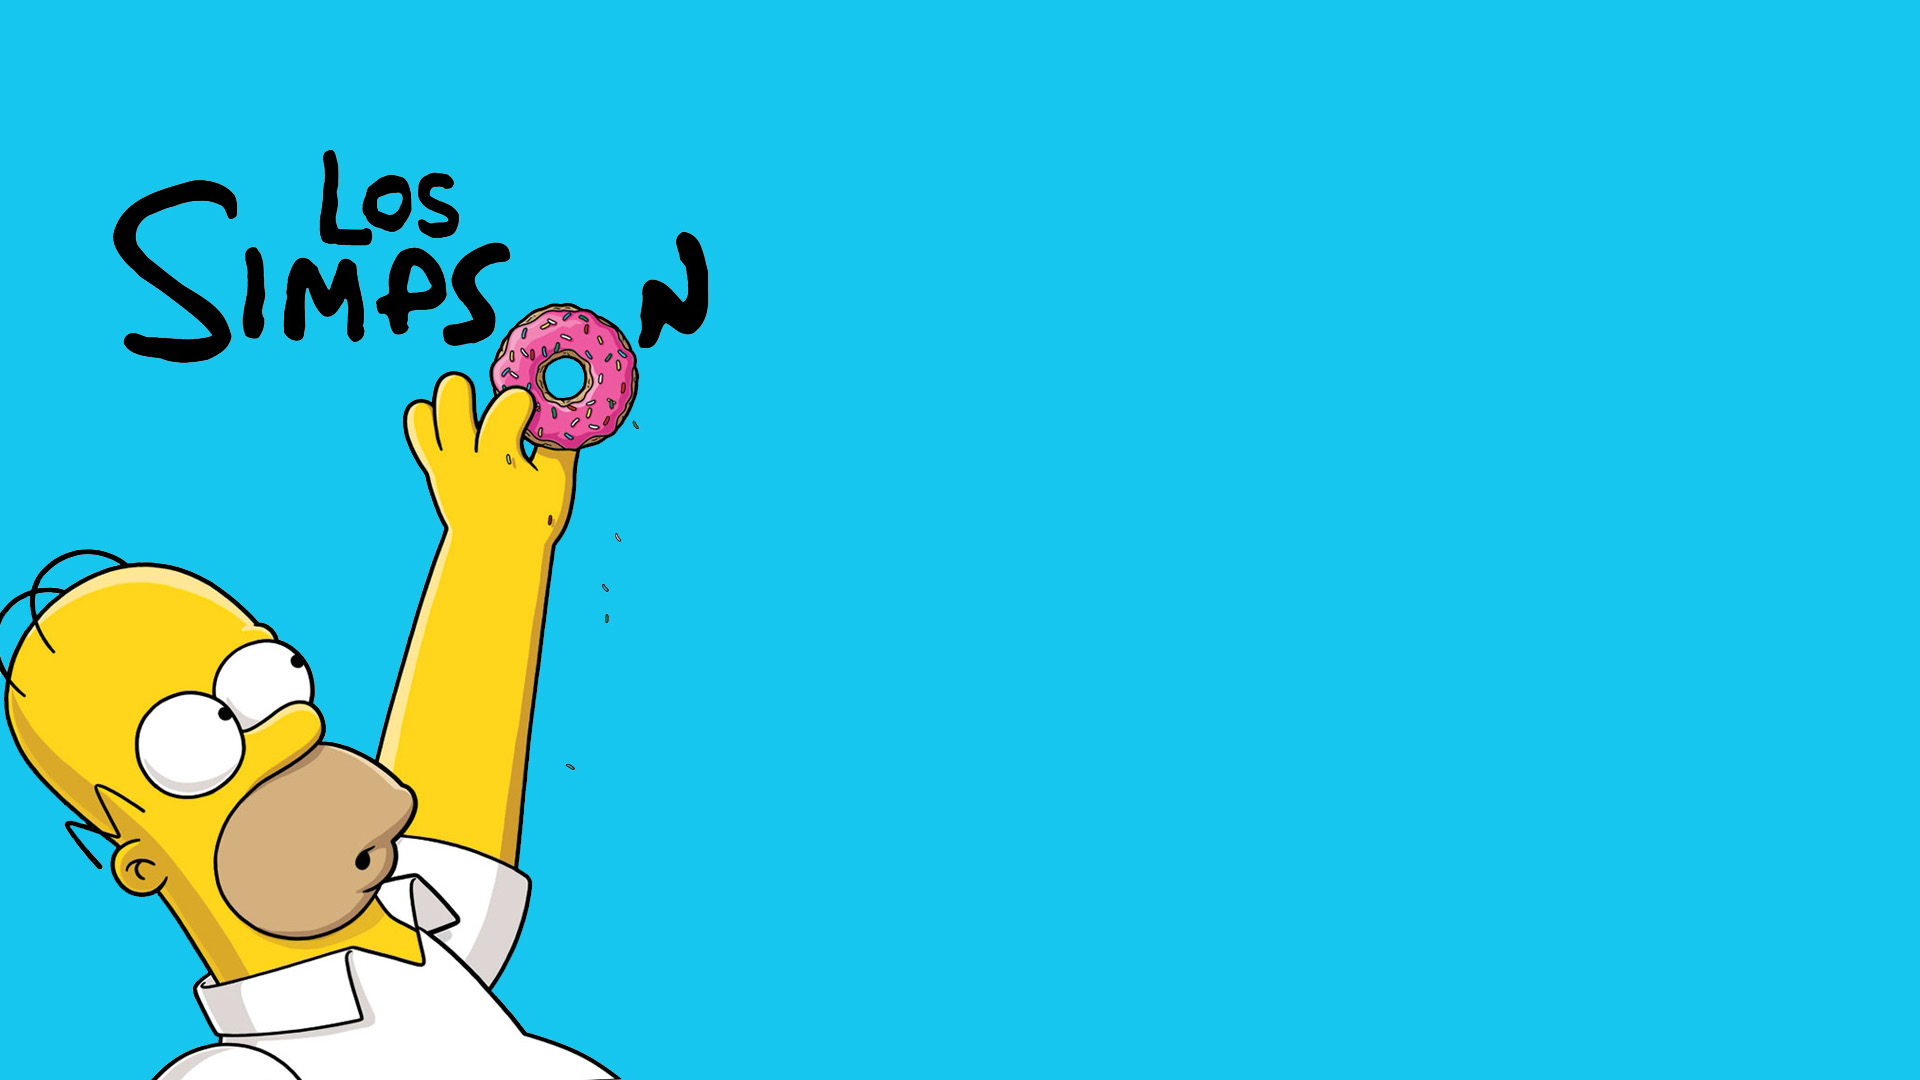 Homer Simpson The Simpsons   Wallpaper High Definition High Quality 1920x1080